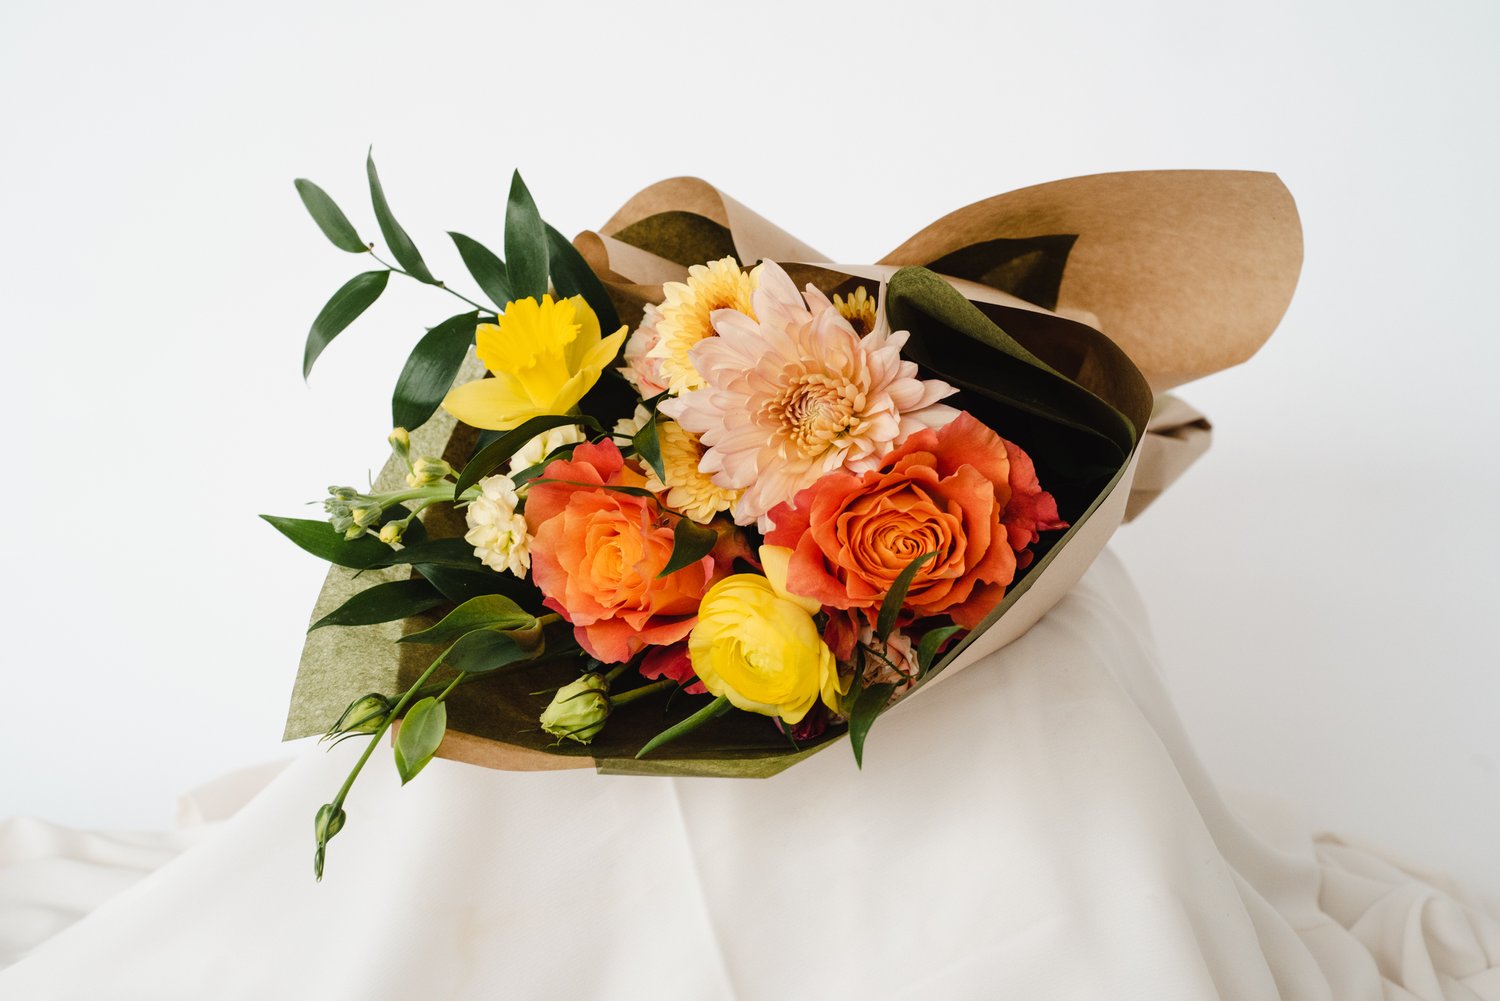 wrapping flower bouquet, wrapping flower bouquet Suppliers and  Manufacturers at